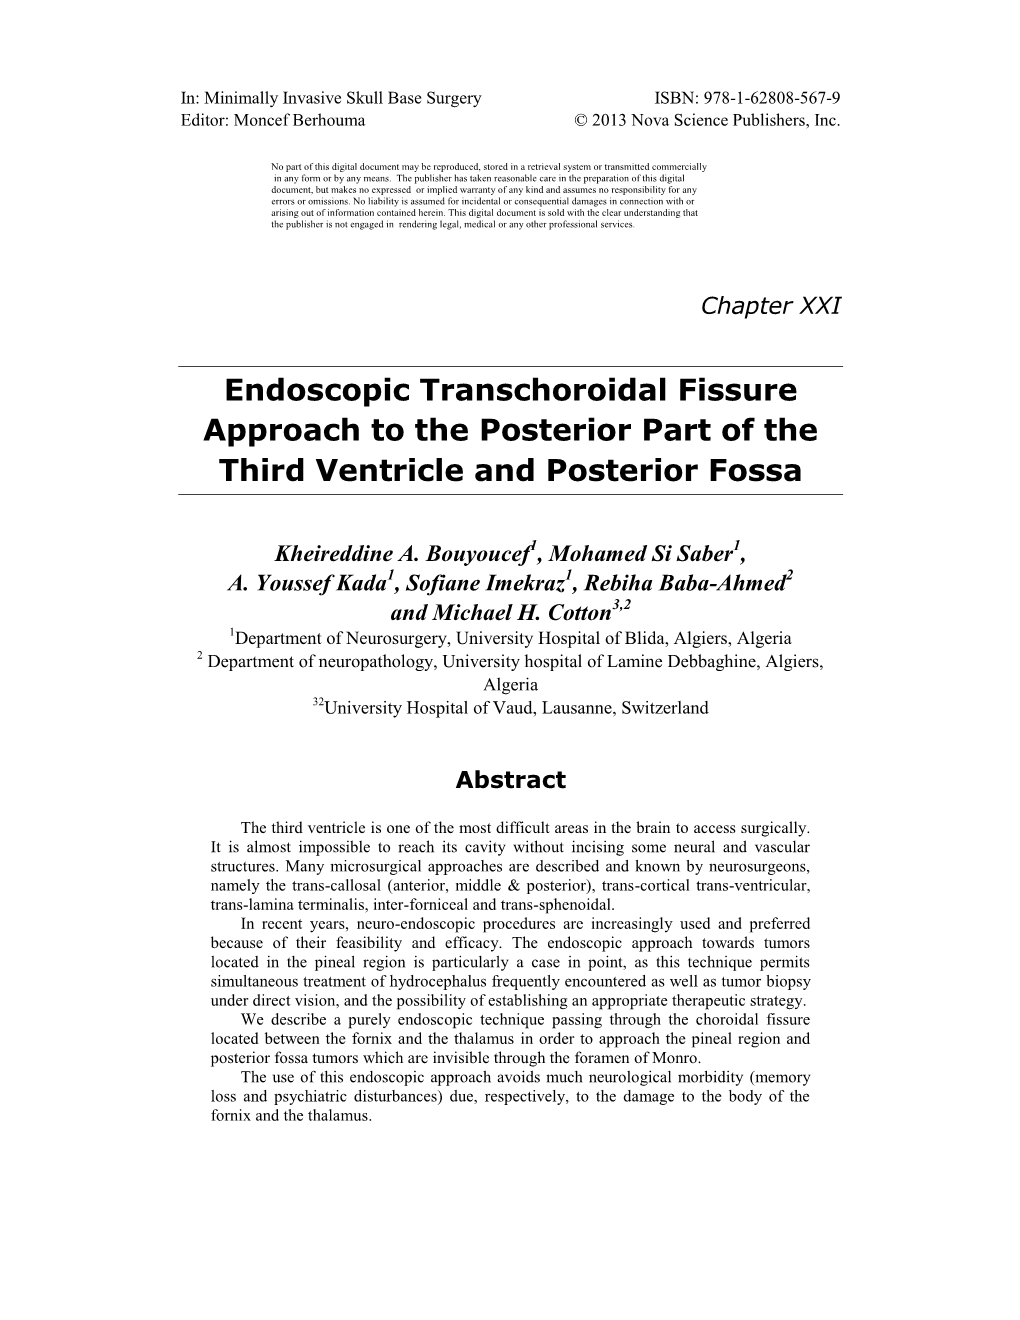 Endoscopic Transchoroidal Fissure Approach to the Posterior Part of the ...